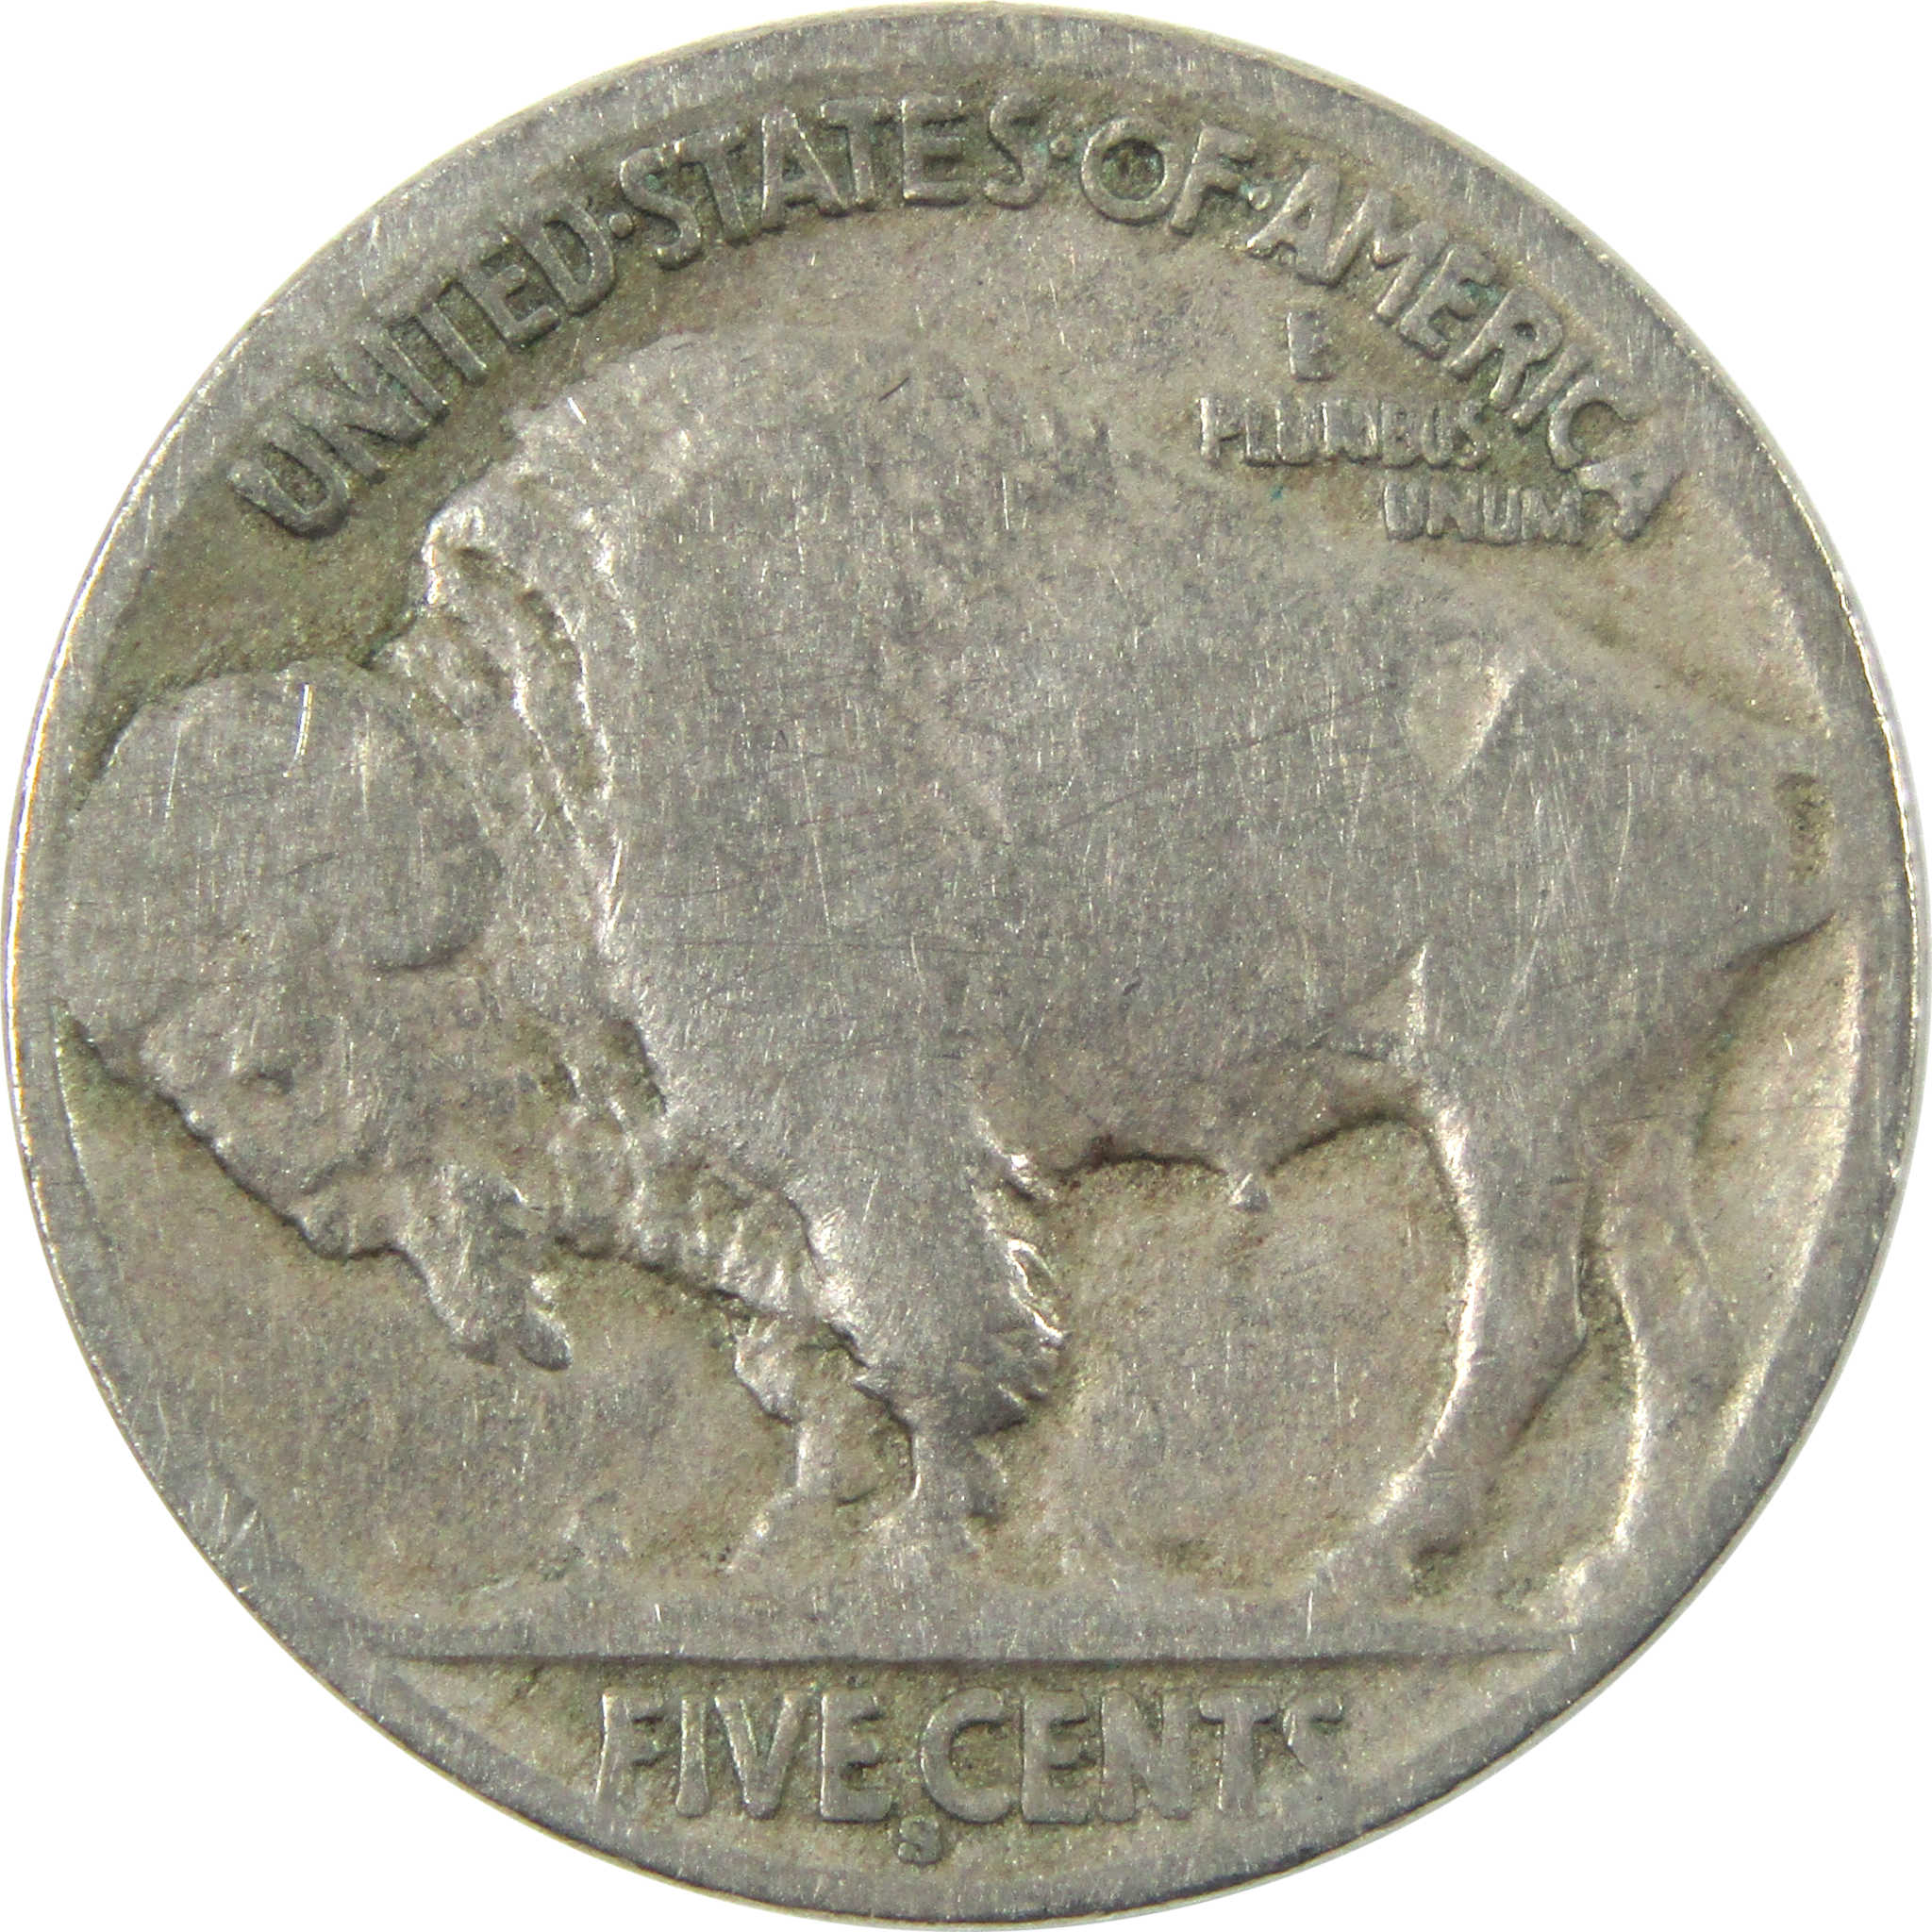 1915 S Indian Head Buffalo Nickel AG About Good 5c Coin SKU:CPC4703